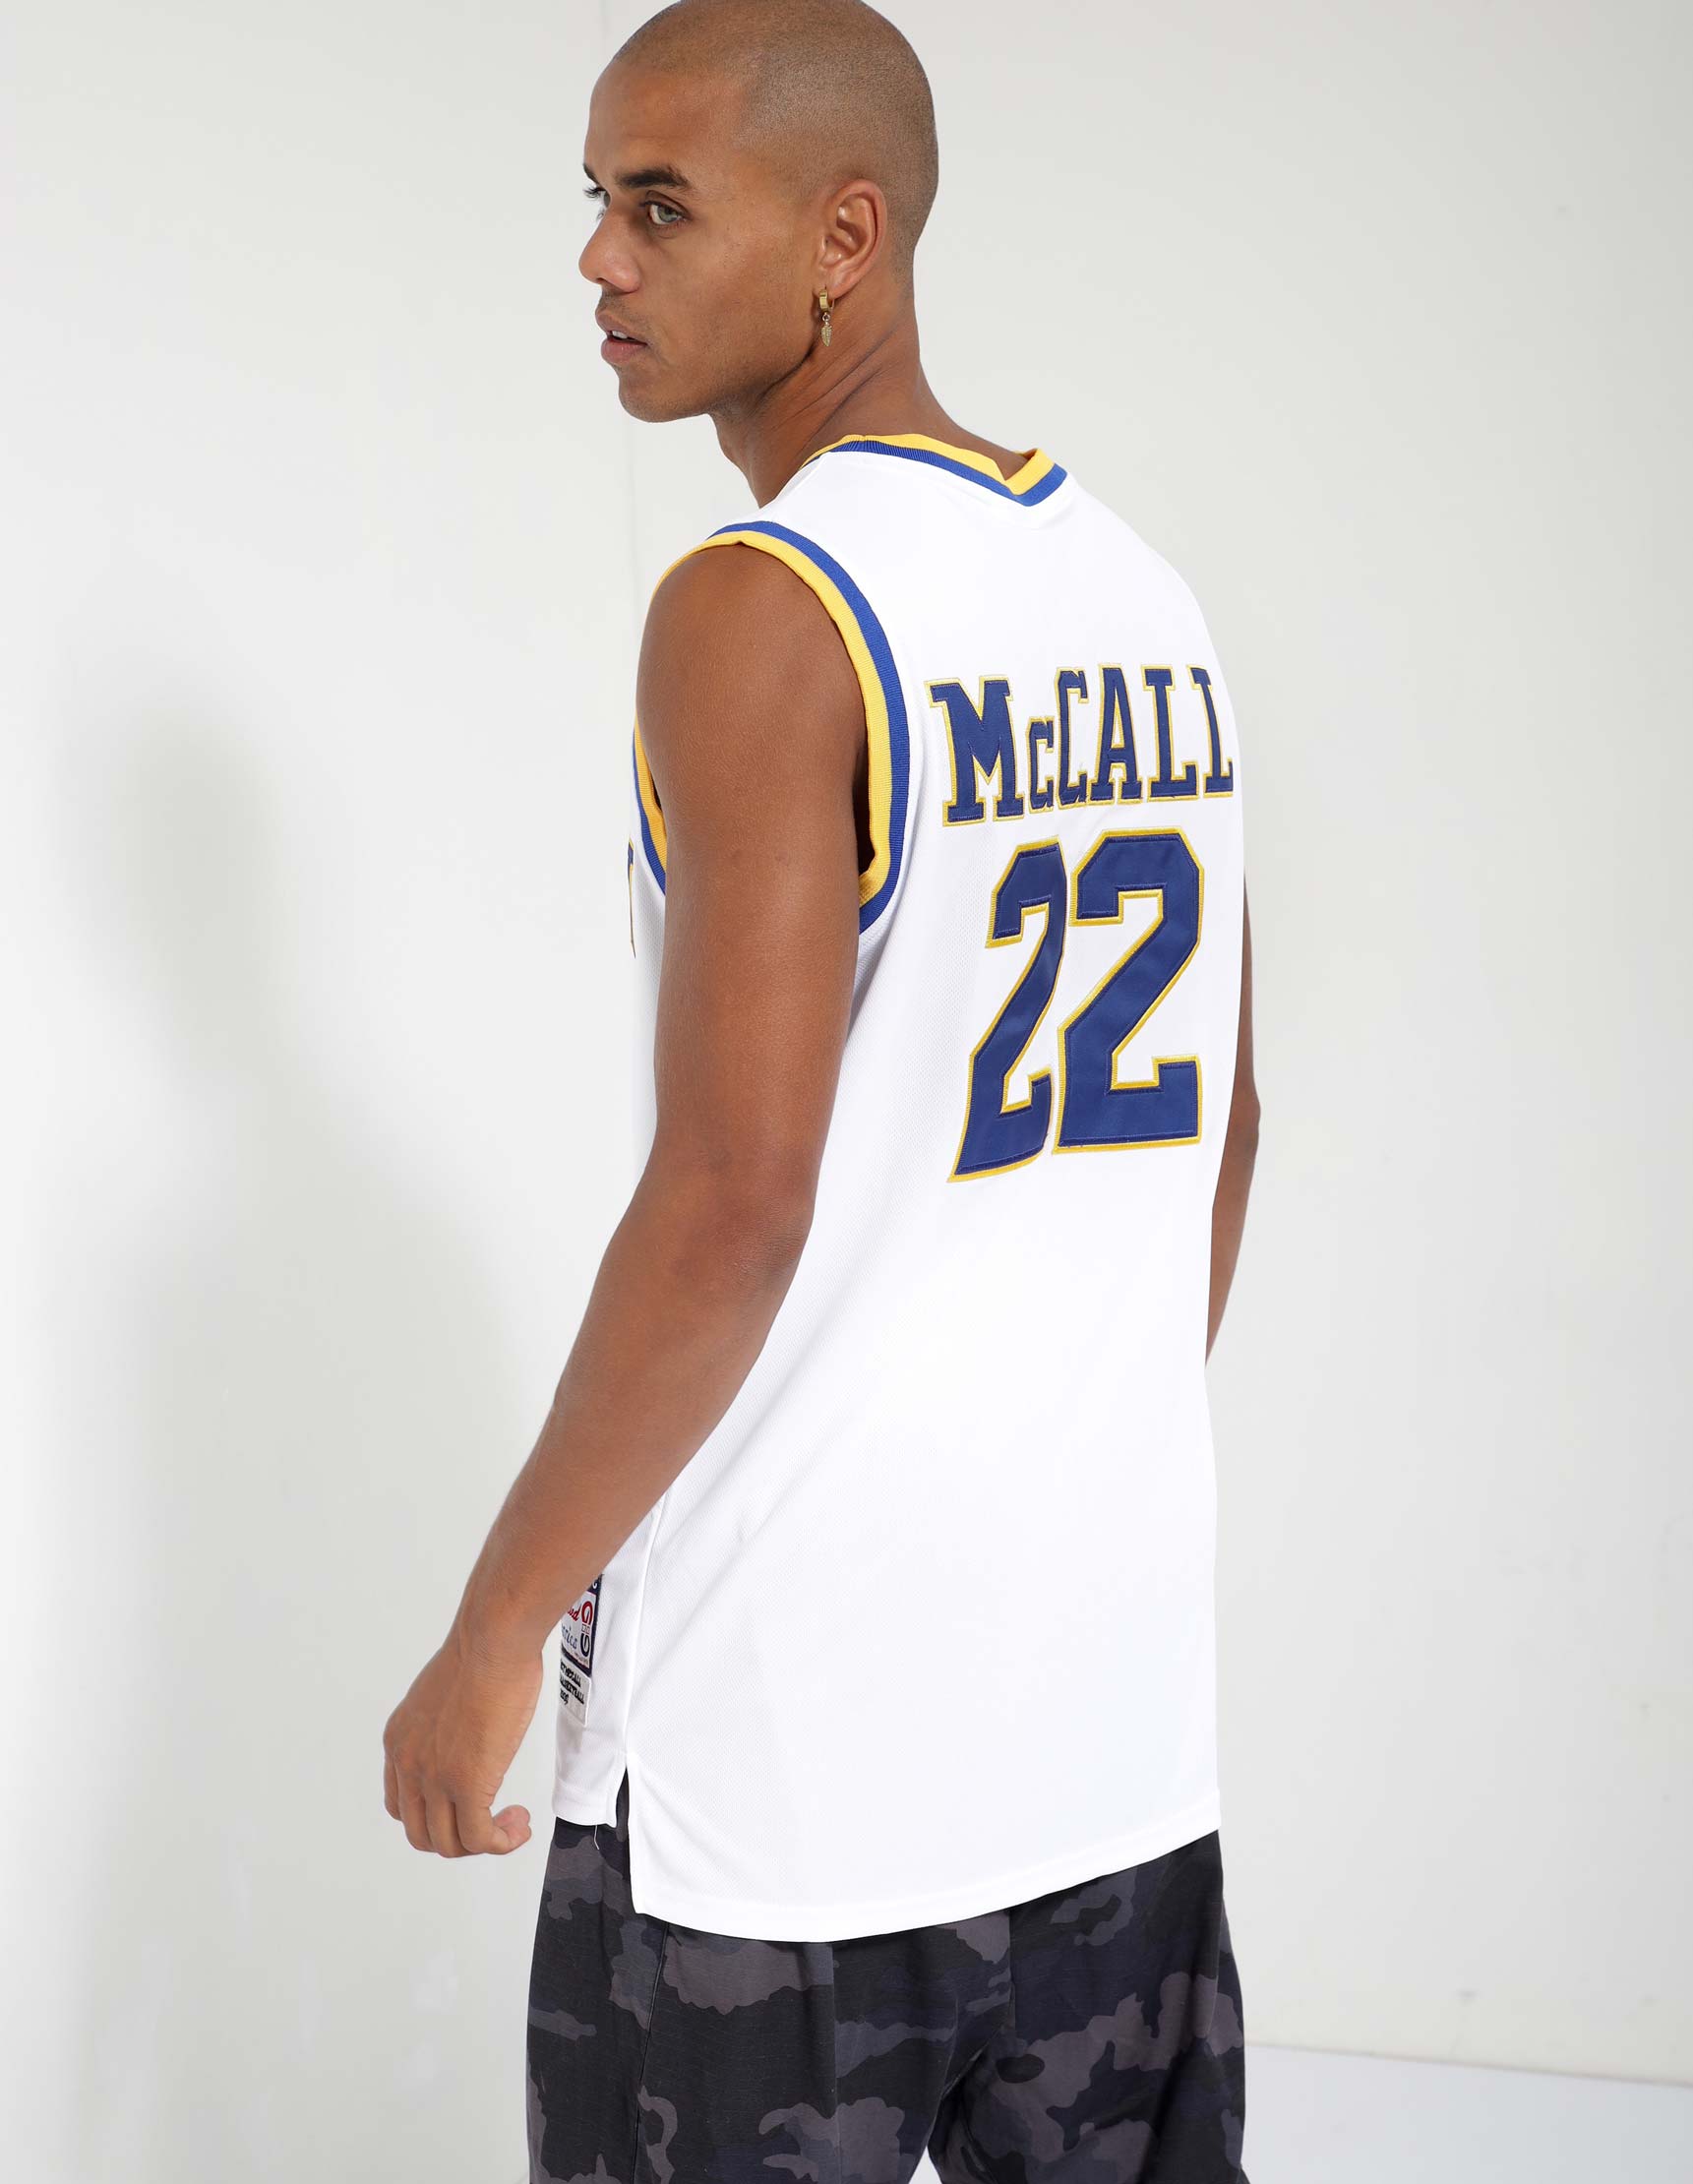 quincy mccall jersey